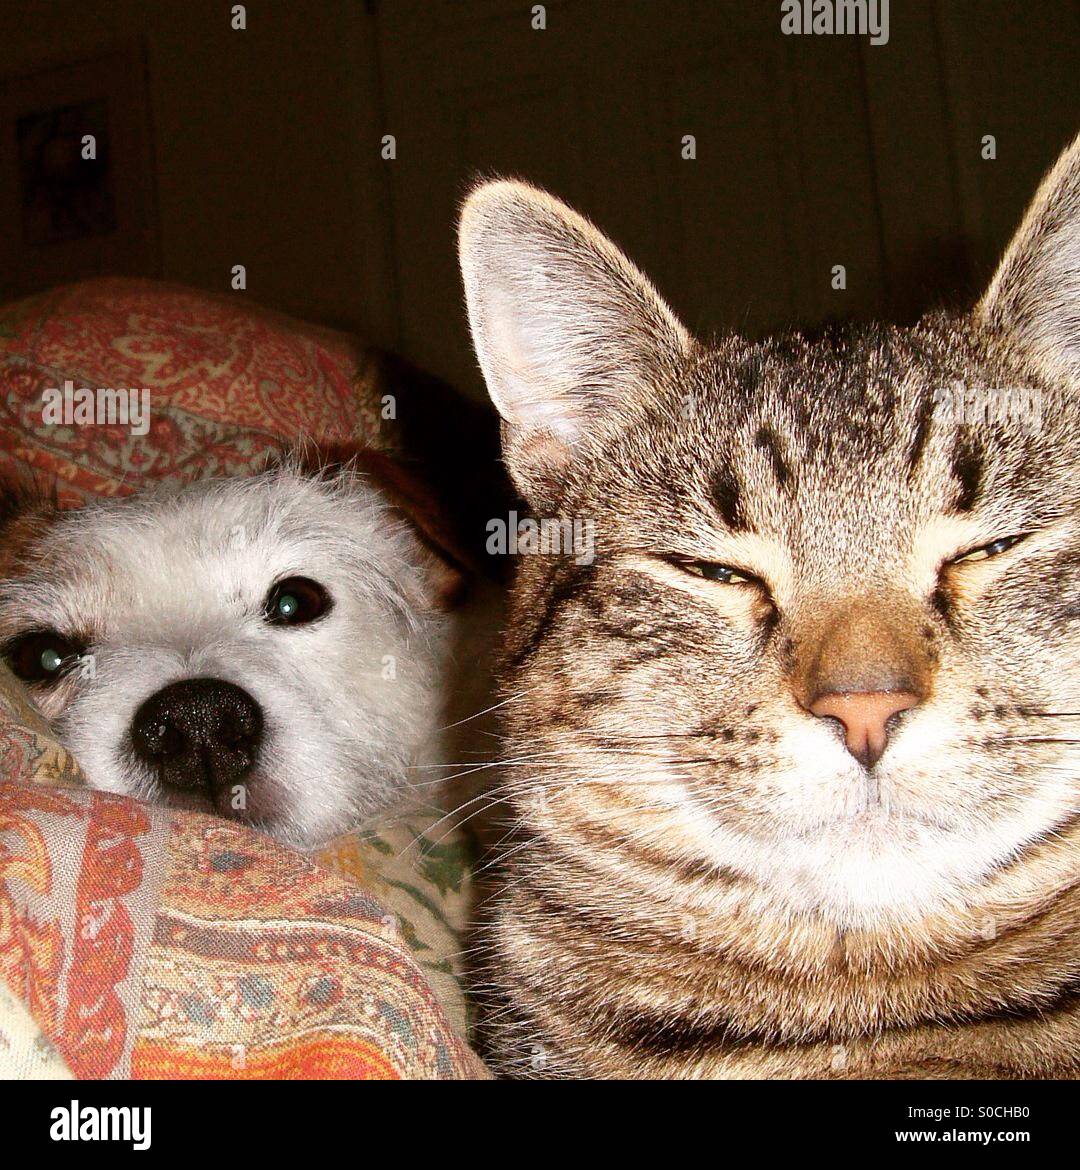 Cat and dog friends laying together Stock Photo